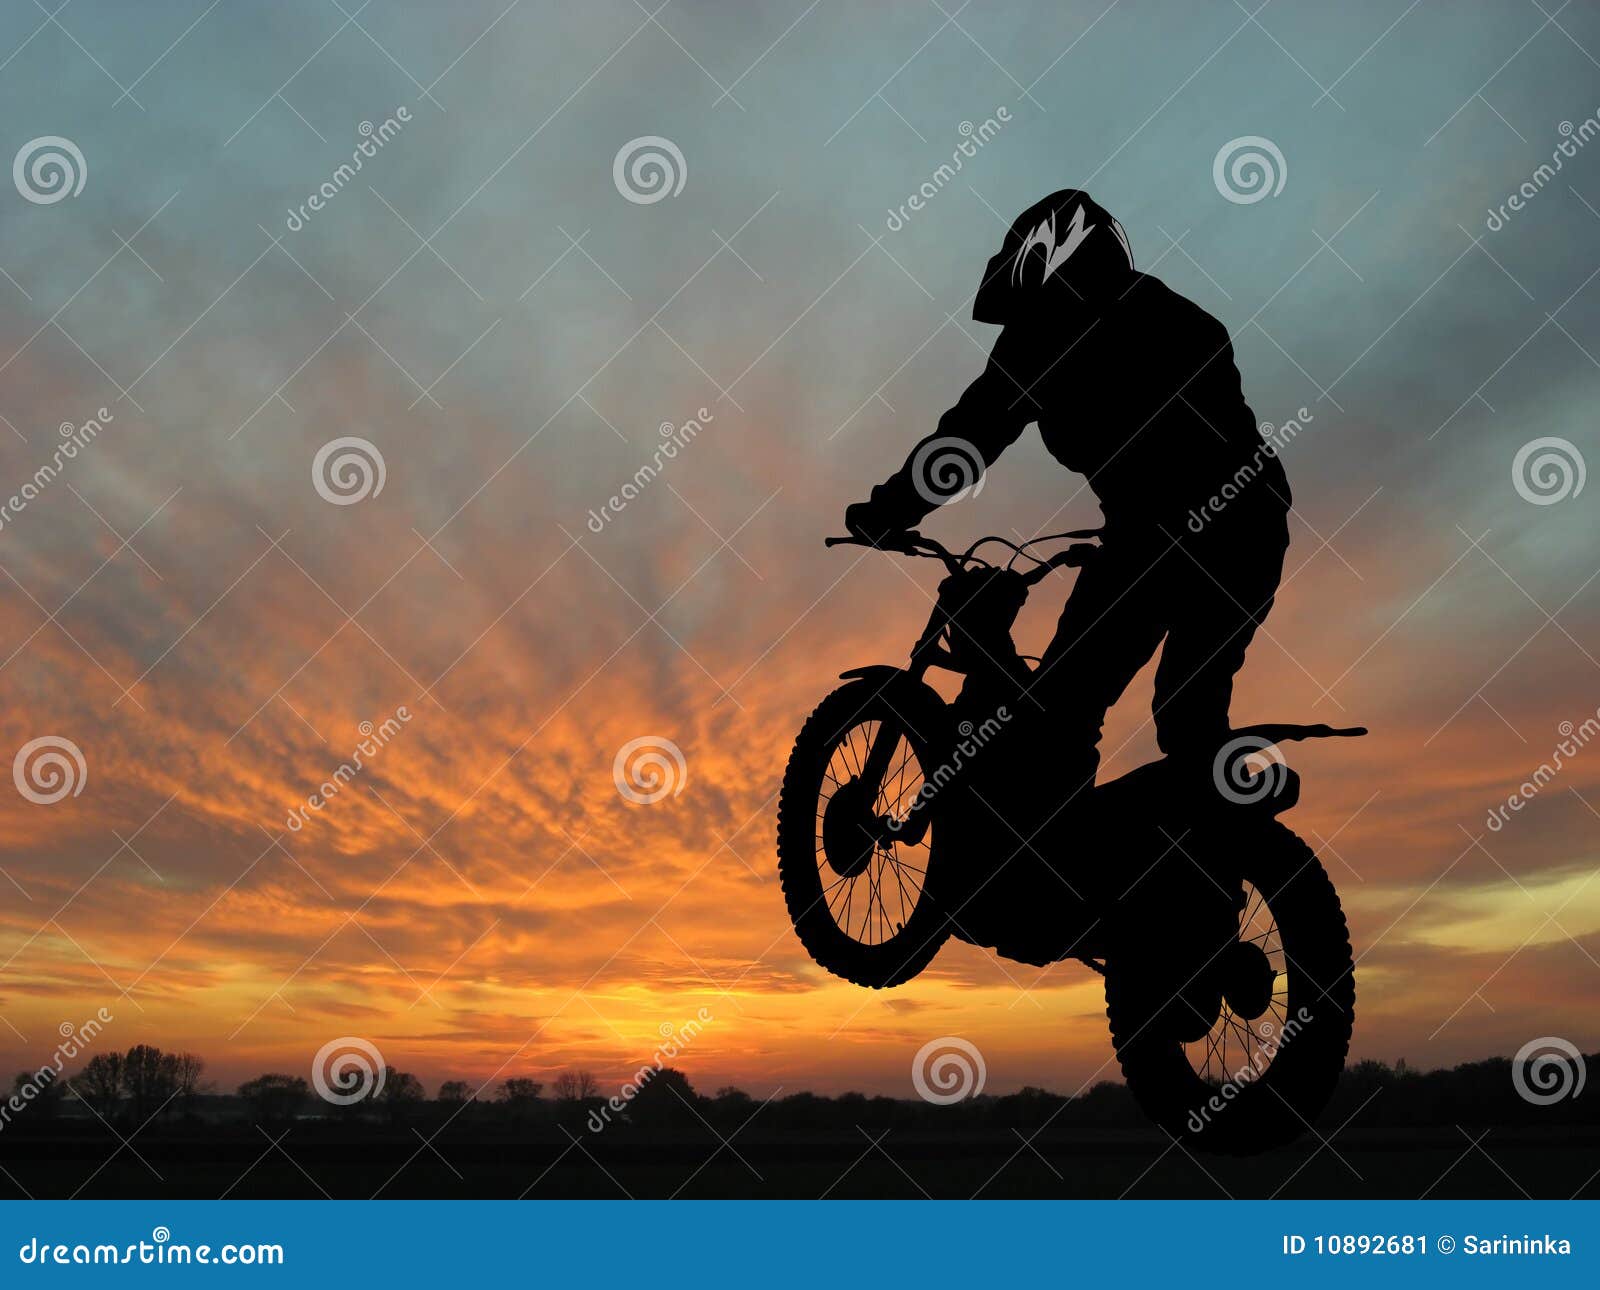 motorcyclist in sunset